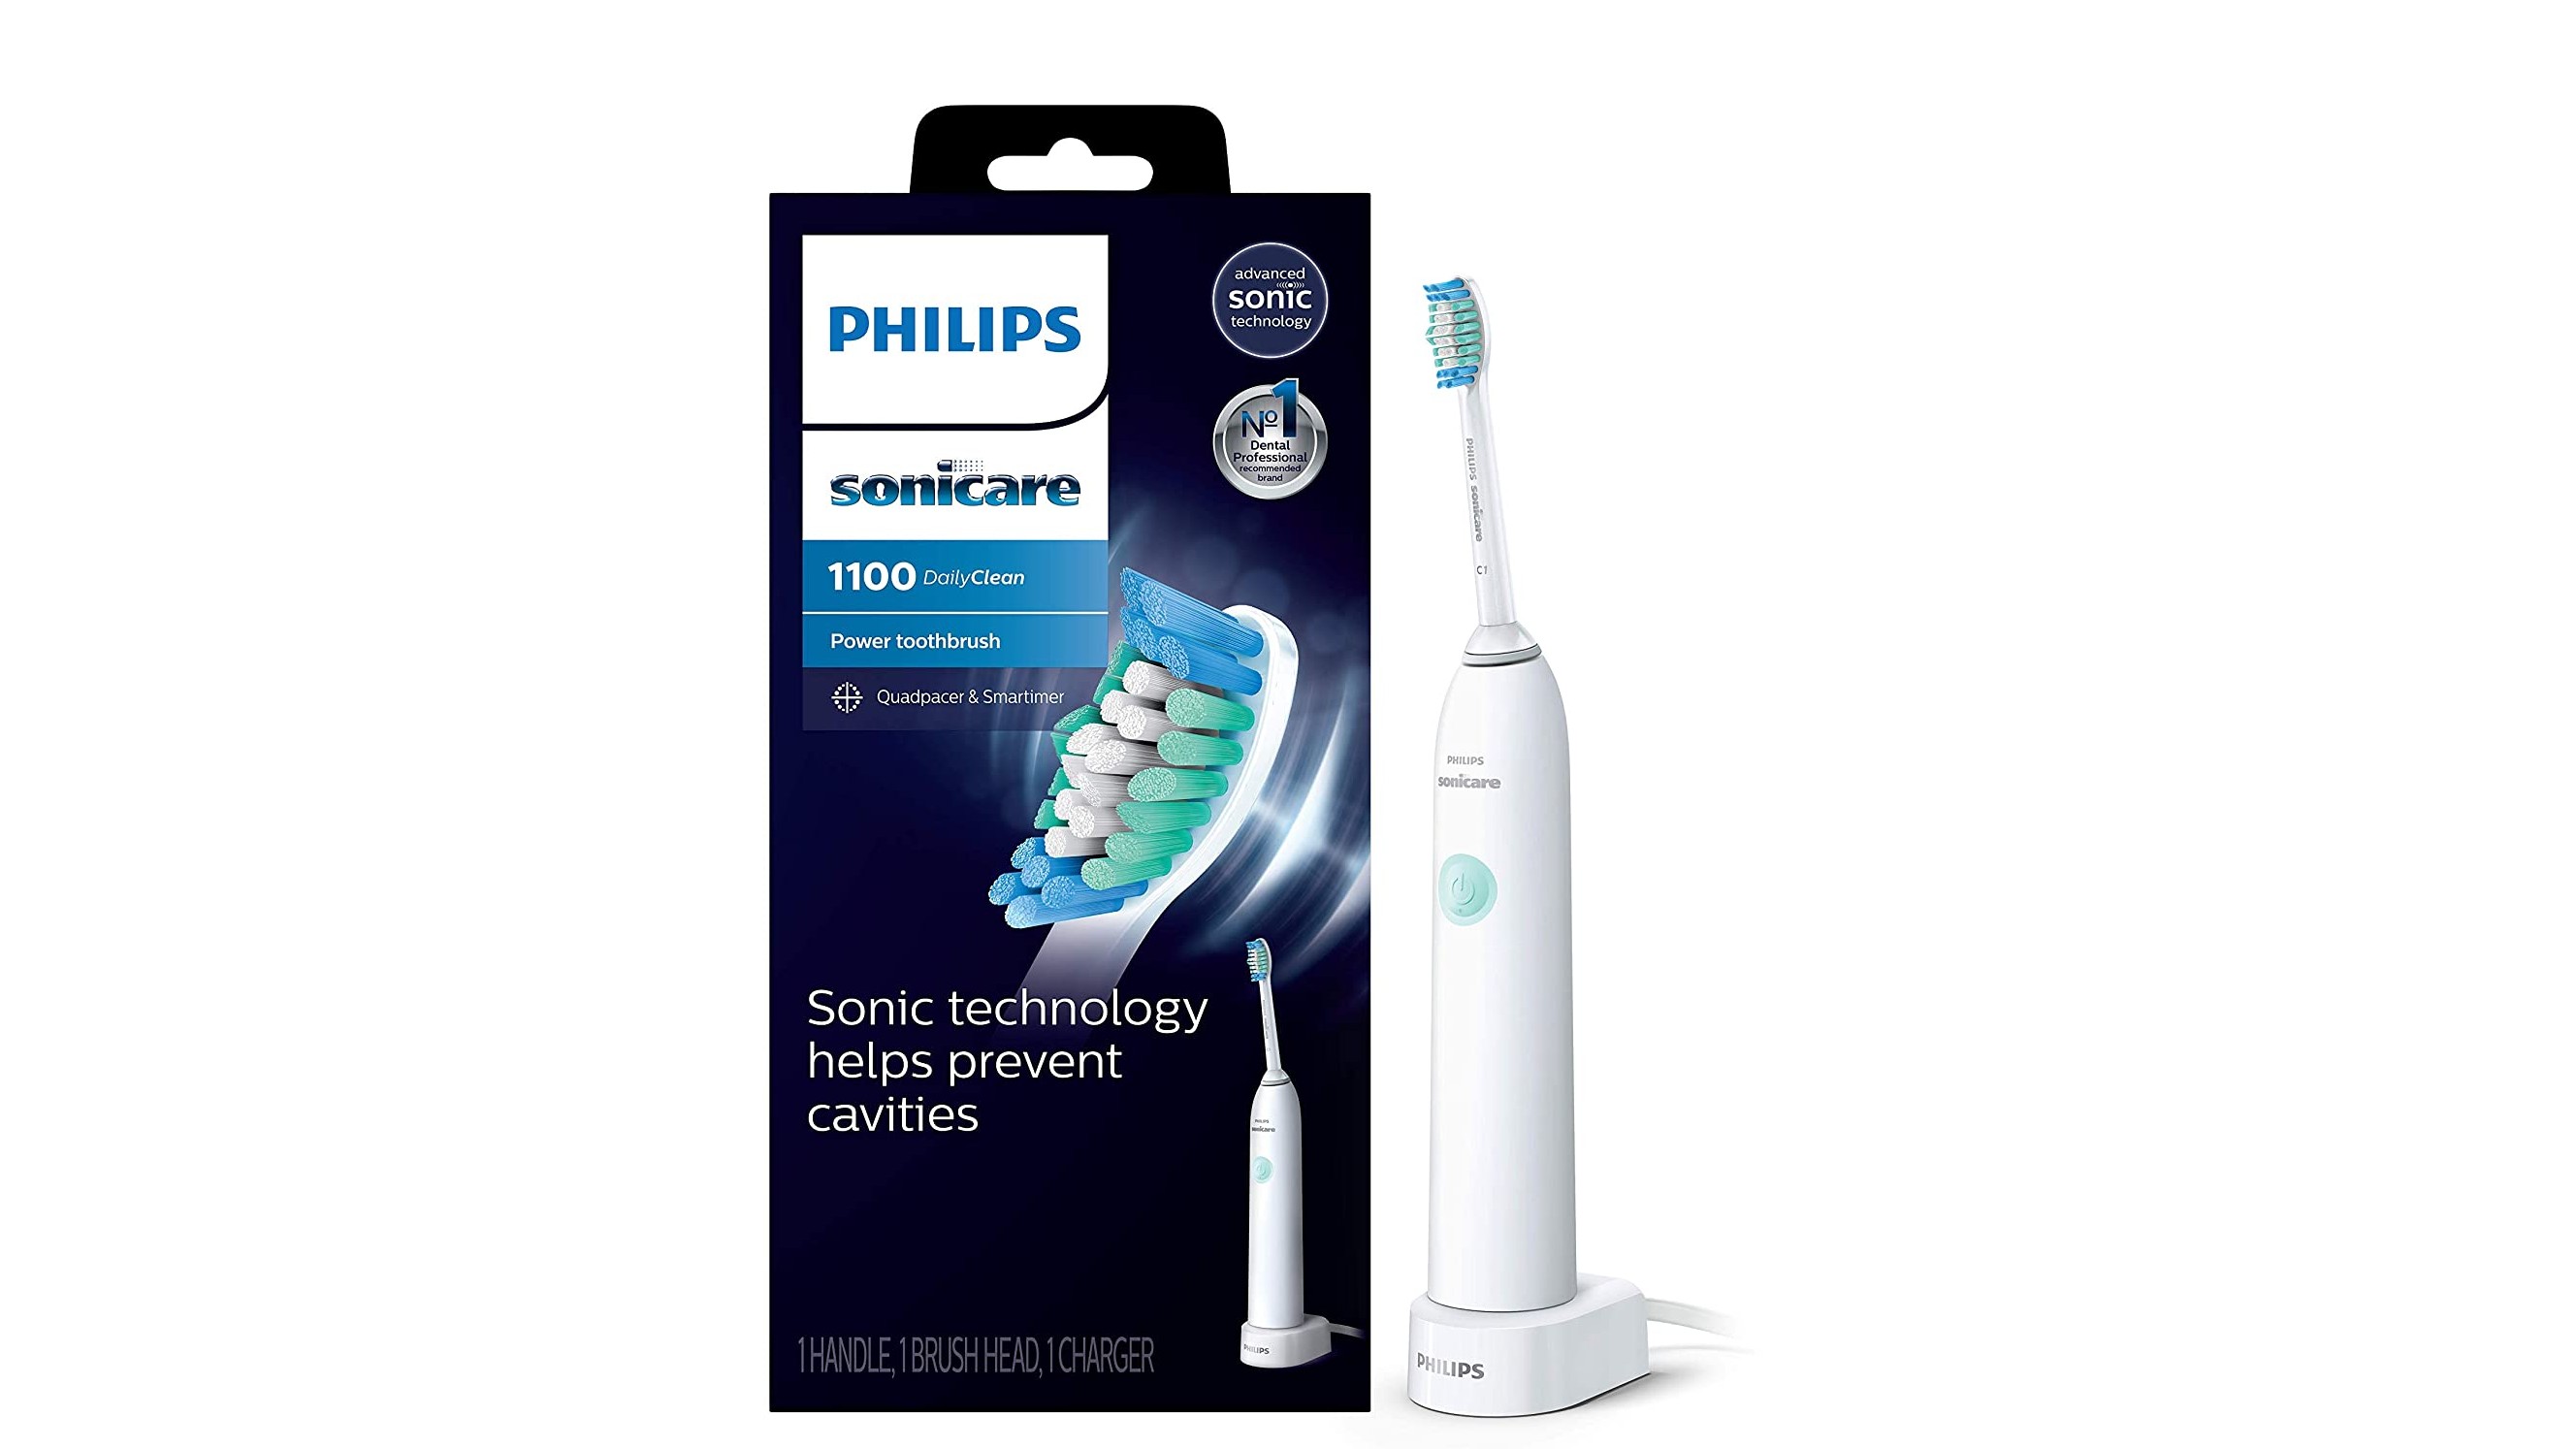 Philips Sonicare DailyClean 1100 pack shot